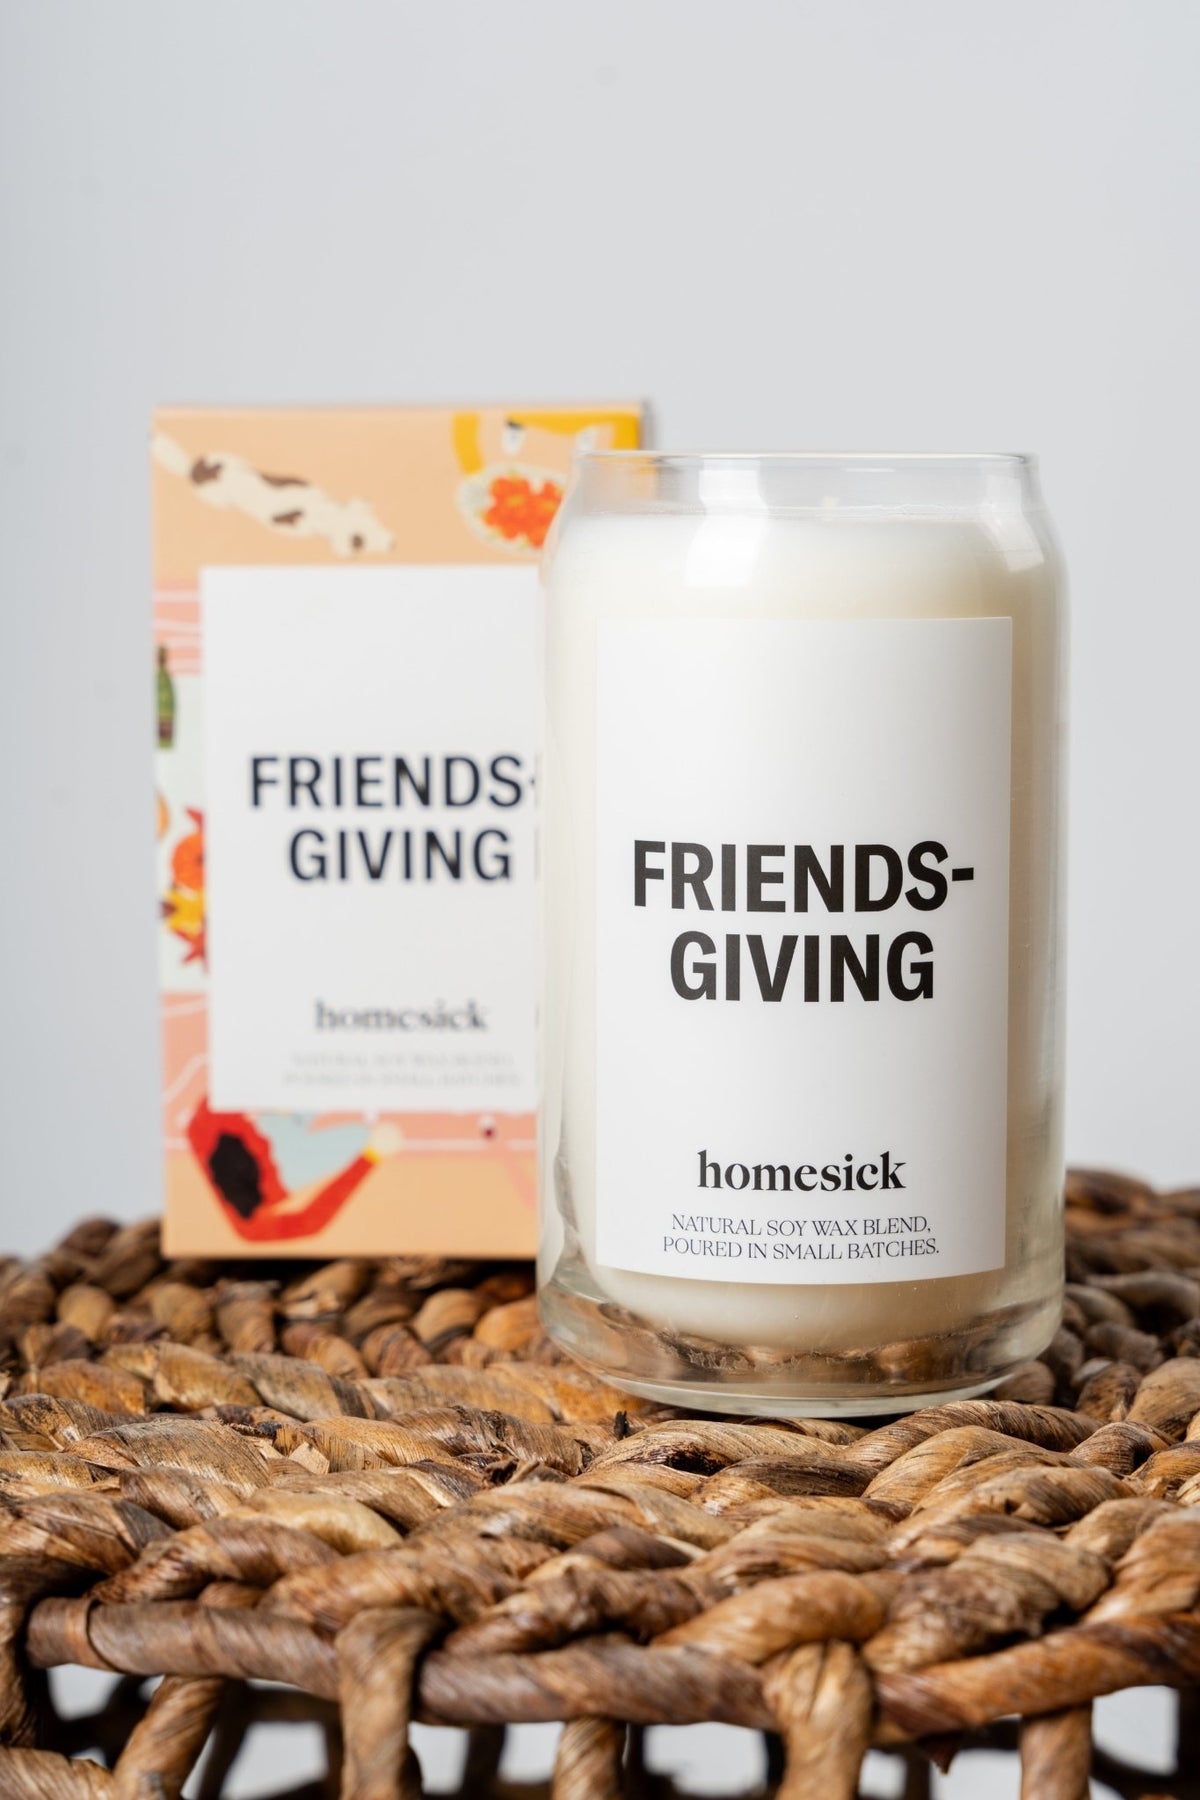 Homesick Friendsgiving candle - Trendy Candles at Lush Fashion Lounge Boutique in Oklahoma City